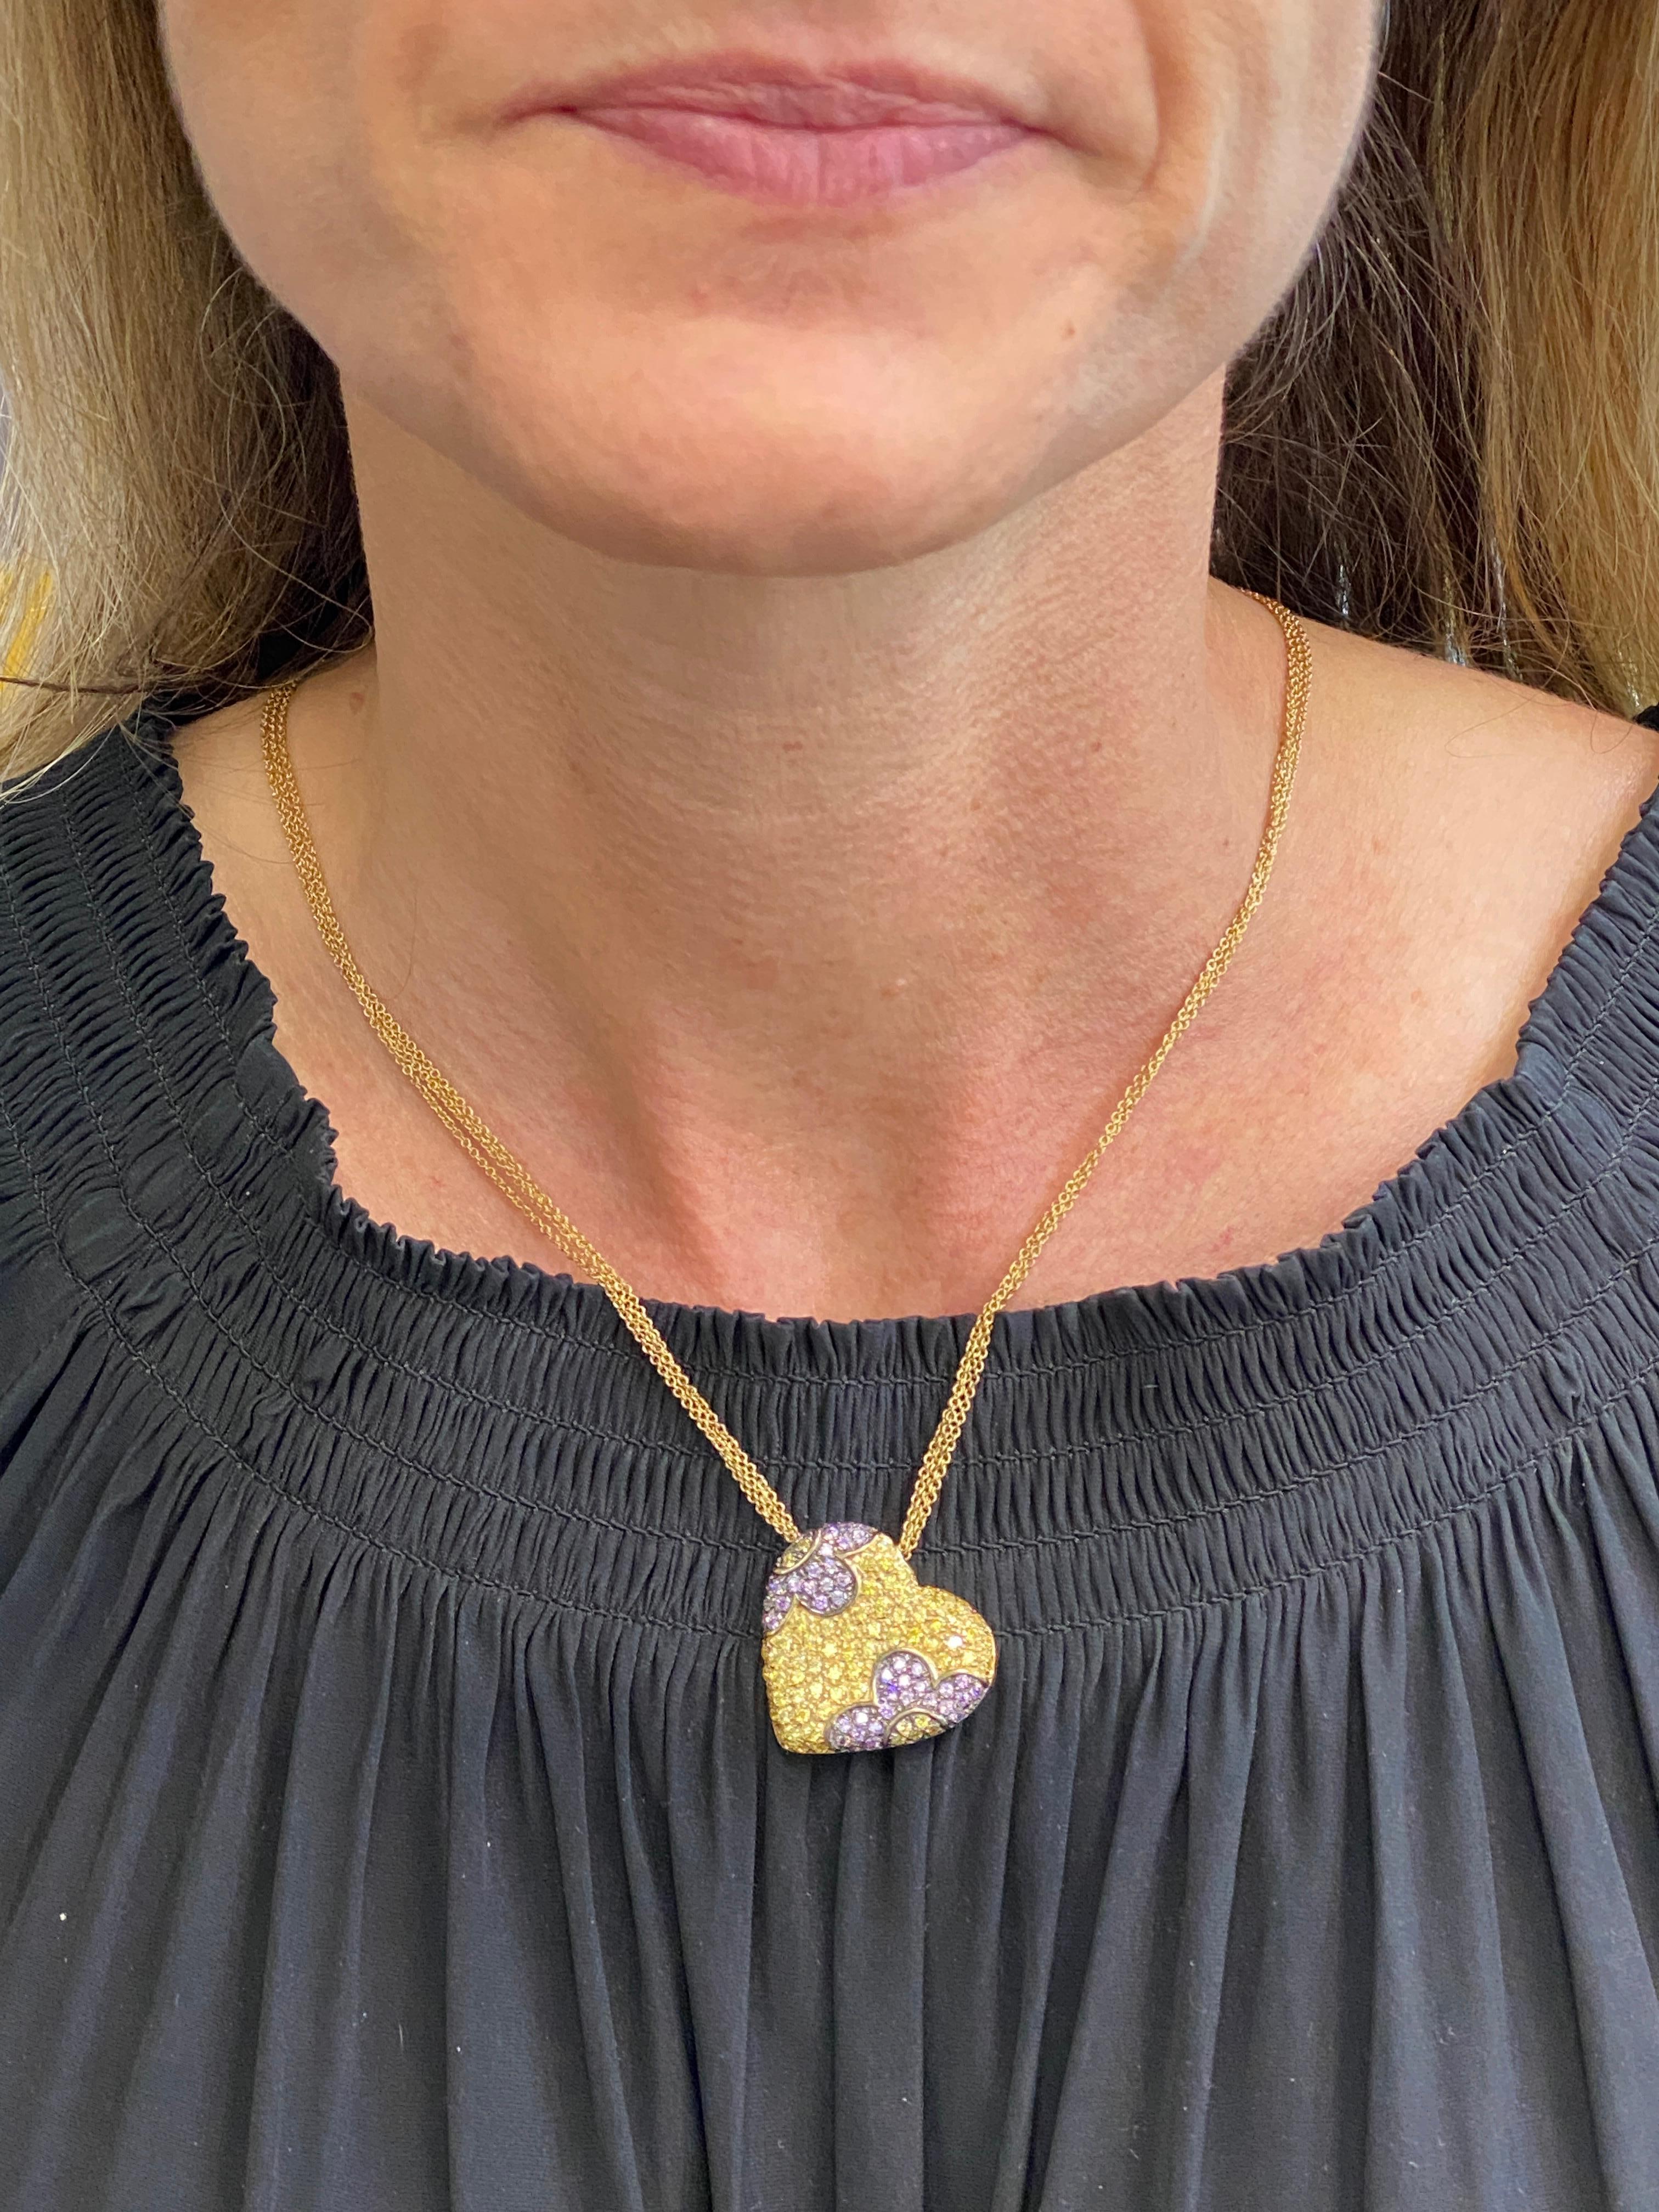 Colorful Italian heart pendant fashioned in 18 karat yellow gold. The pendant features round brilliant cut yellow & purple sapphires in a floral design. The pendant measures 1.0 x 1.0 inch, and the multistrand necklace measures 17 inches in length. 